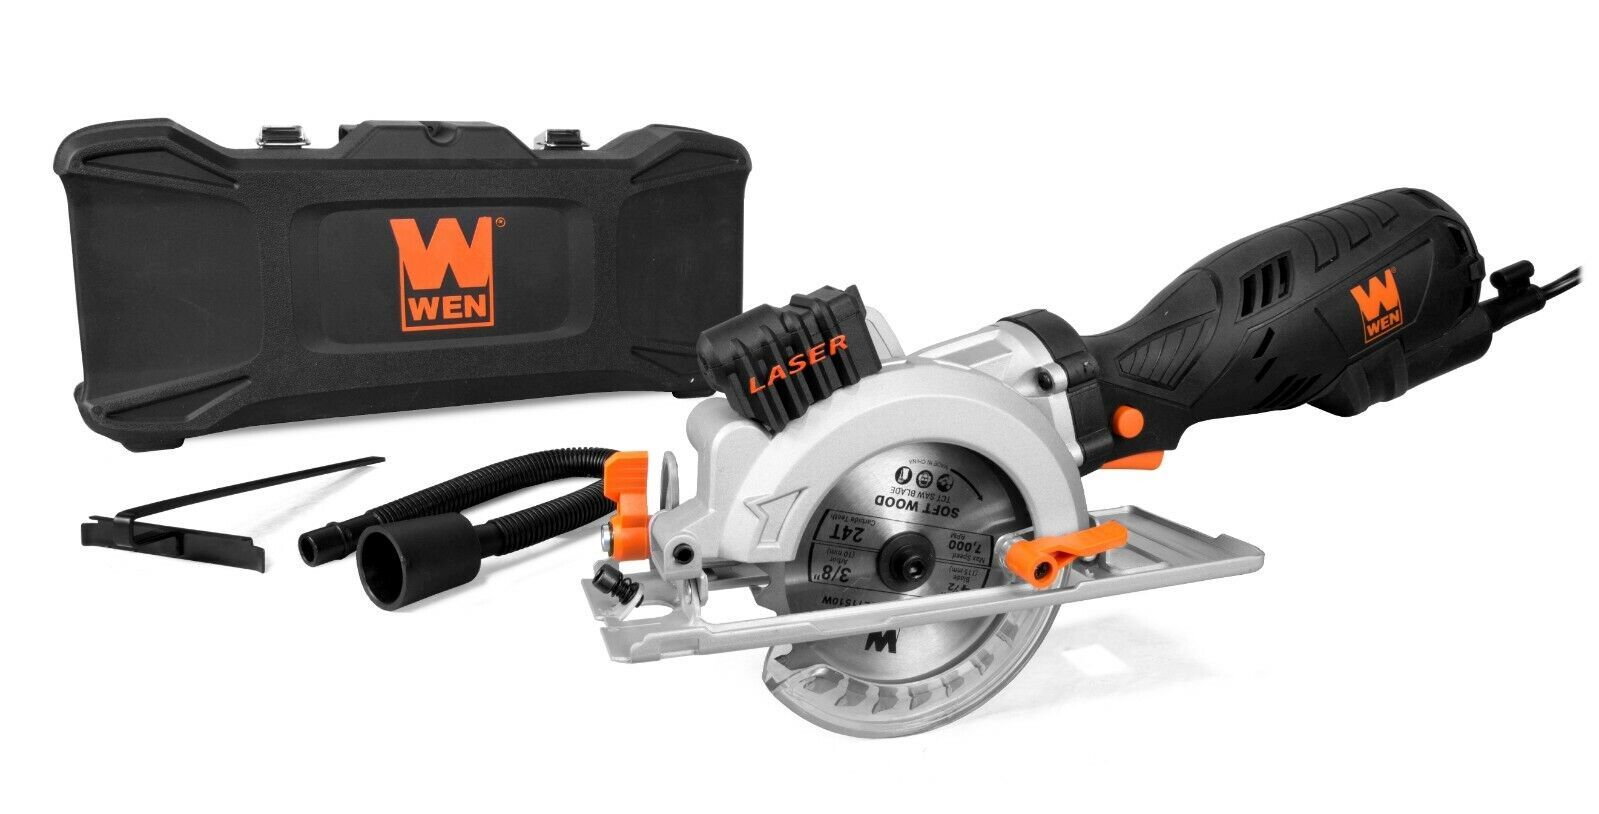 Wen 3625 5-Amp 4-1/2" Beveling Compact Circular Saw With Laser And Carrying Case - $103.52